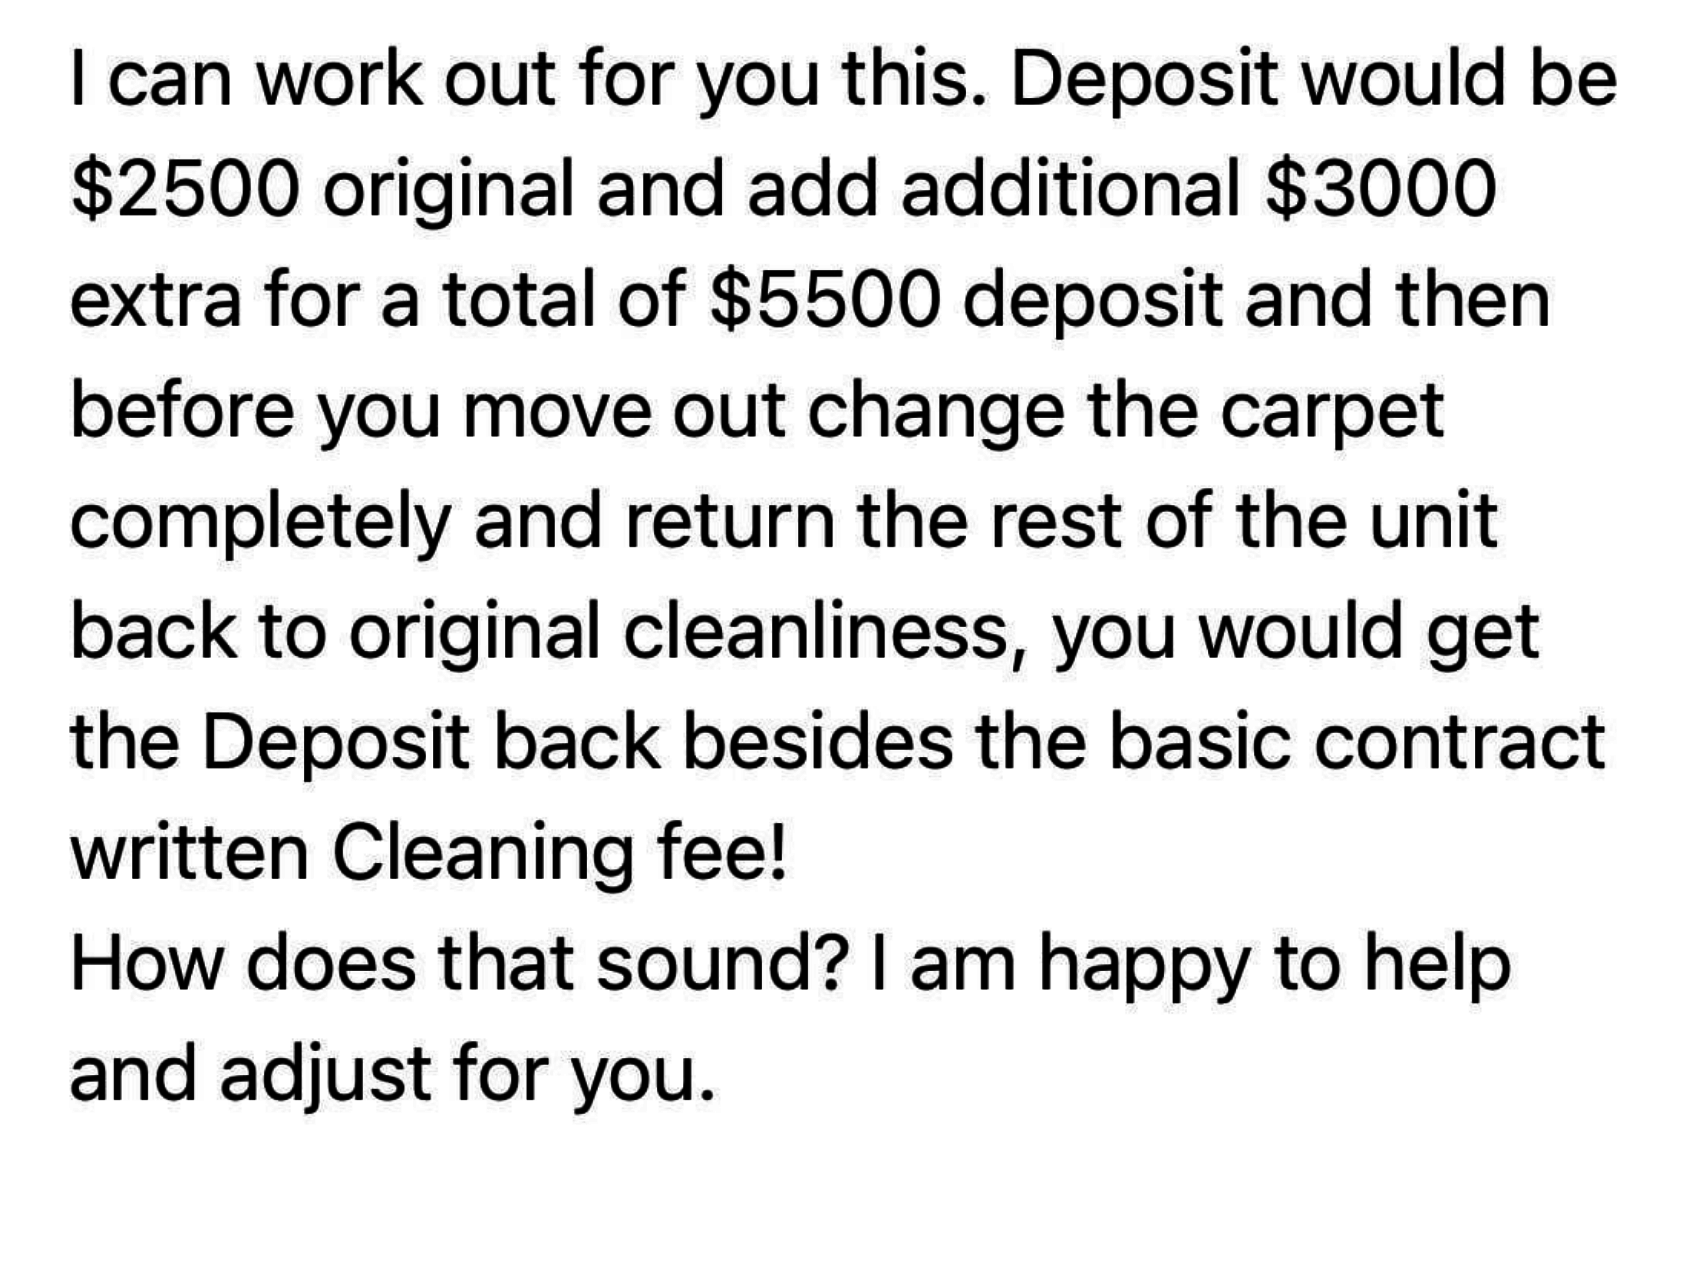 The total deposit is $5,500, and then before the tenant moves out, they have to &quot;change the carpet completely&quot; and return the unit to &quot;original cleanliness,&quot; and they would get the deposit back minus &quot;the basic contract written cleaning fee&quot;